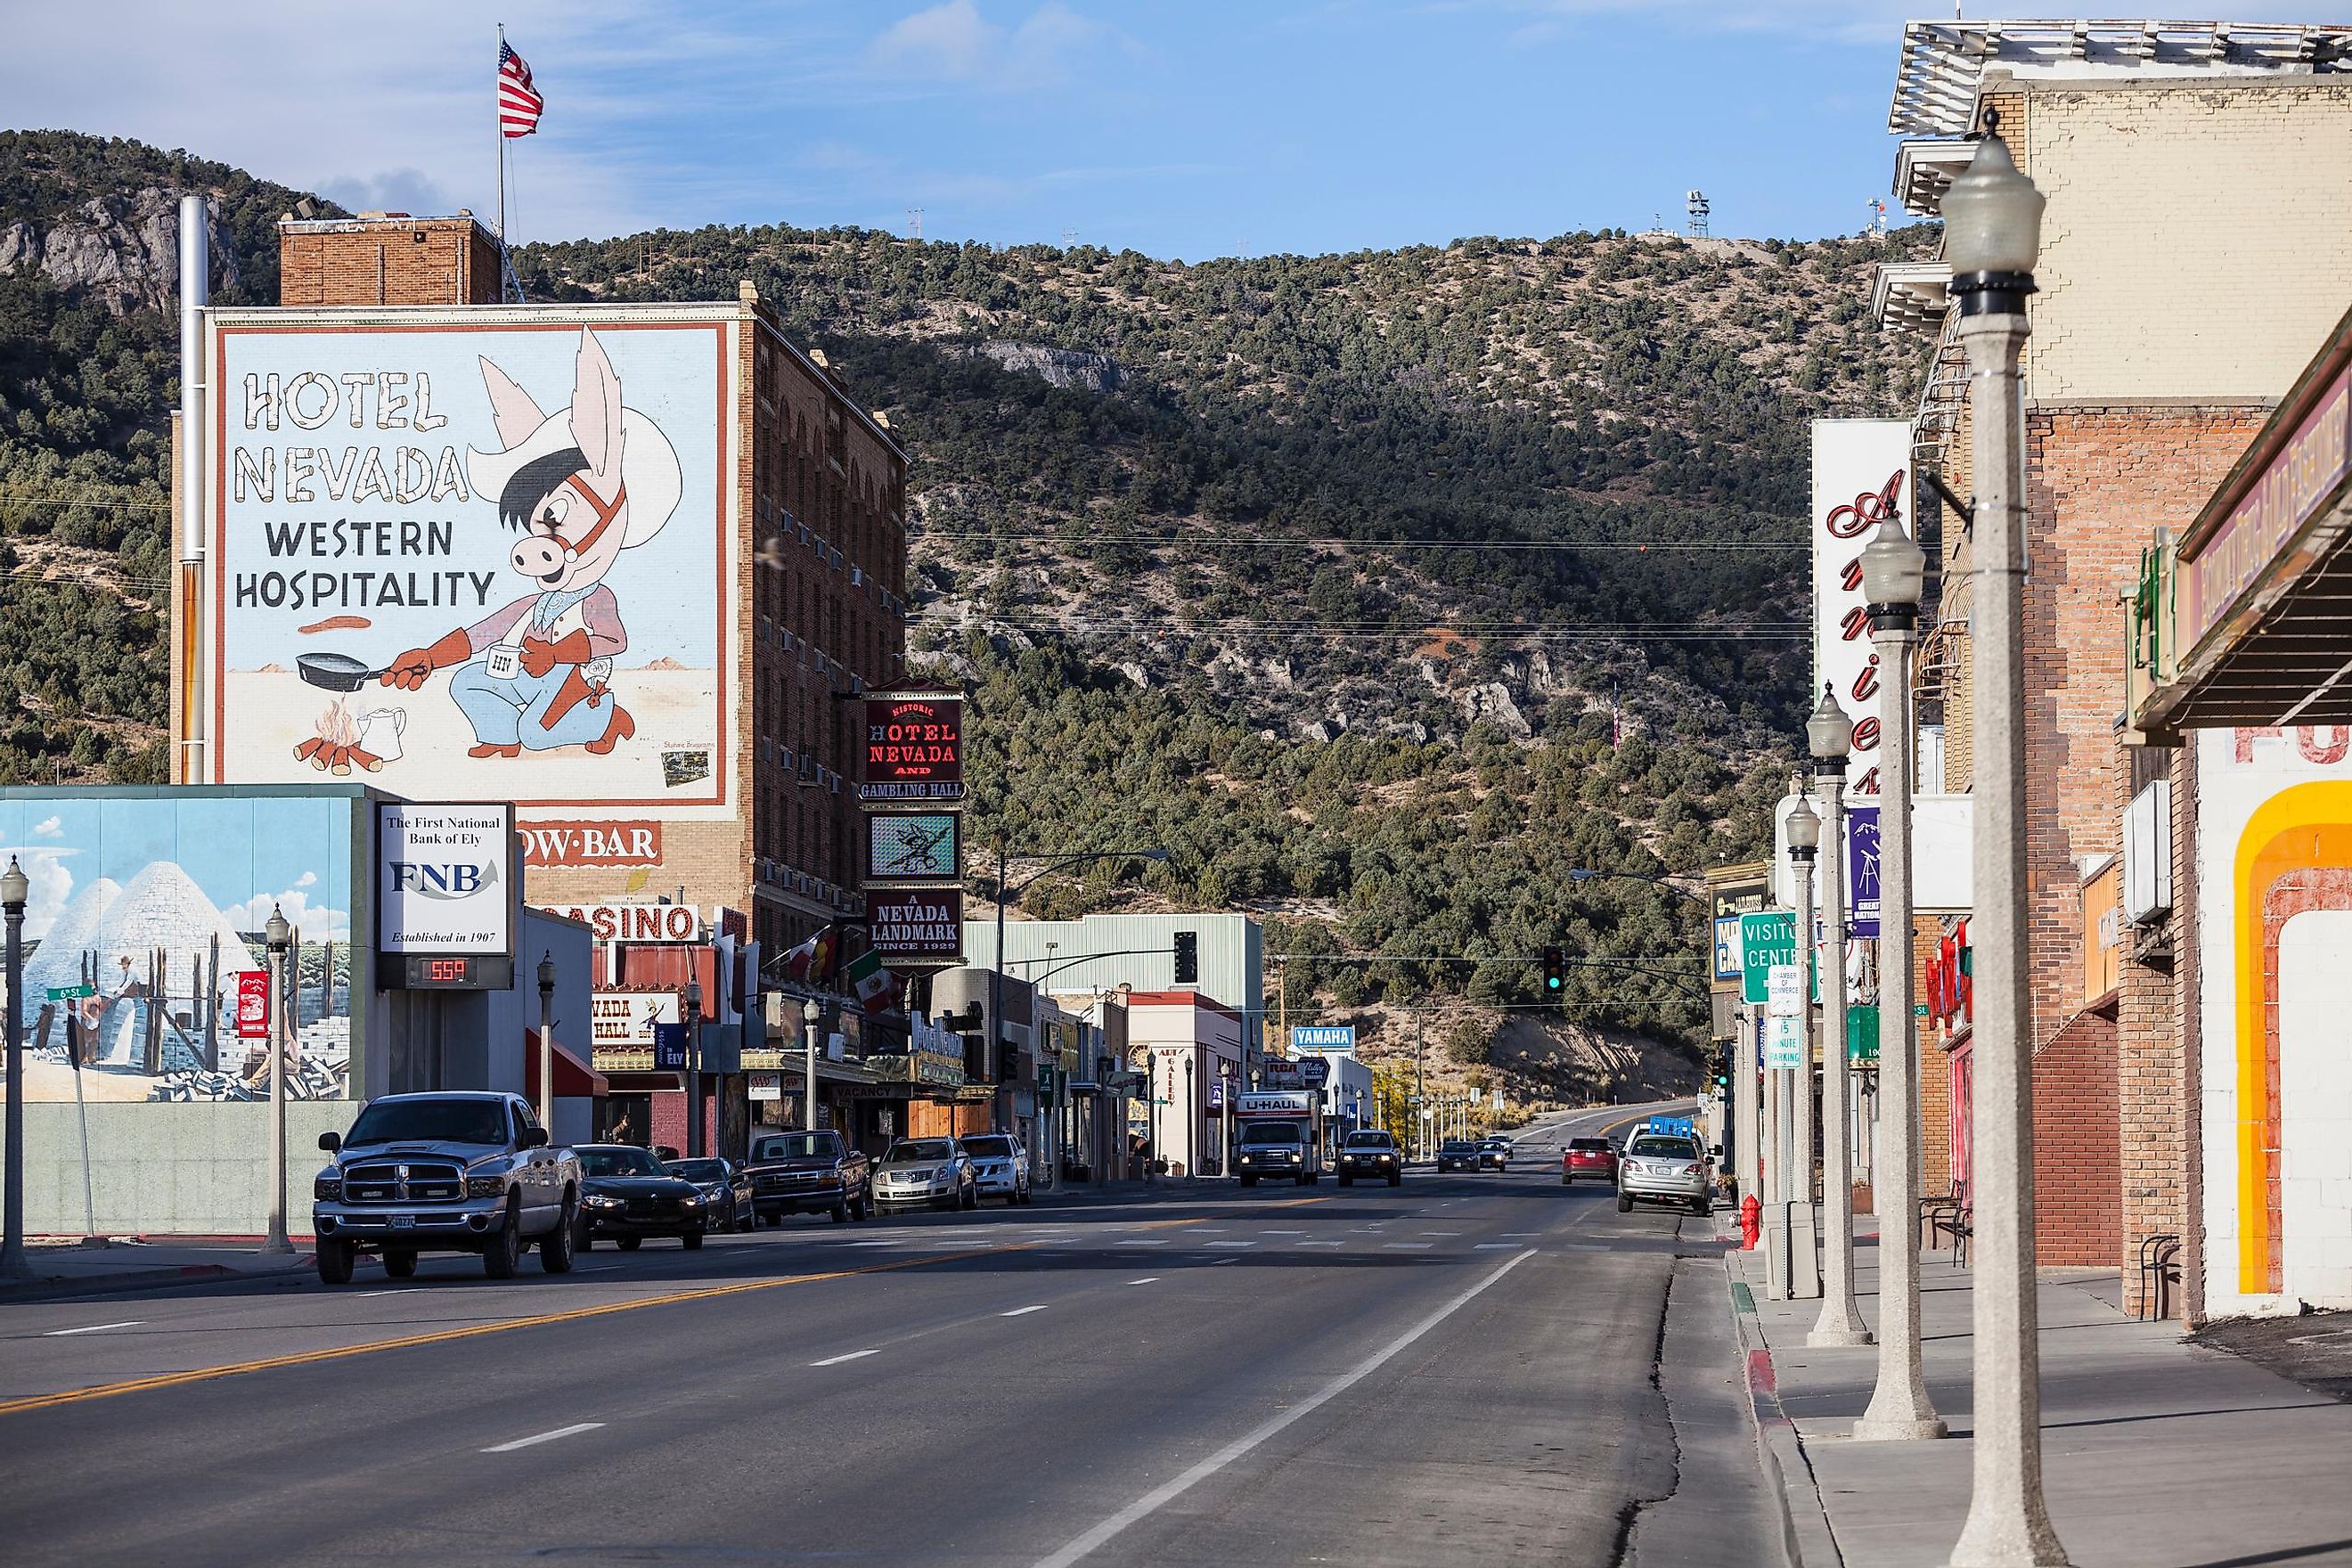 Hotel Nevada and old storefronts along historic Lincoln Highway on October 16, 2016 in Ely, Nevada, USA.